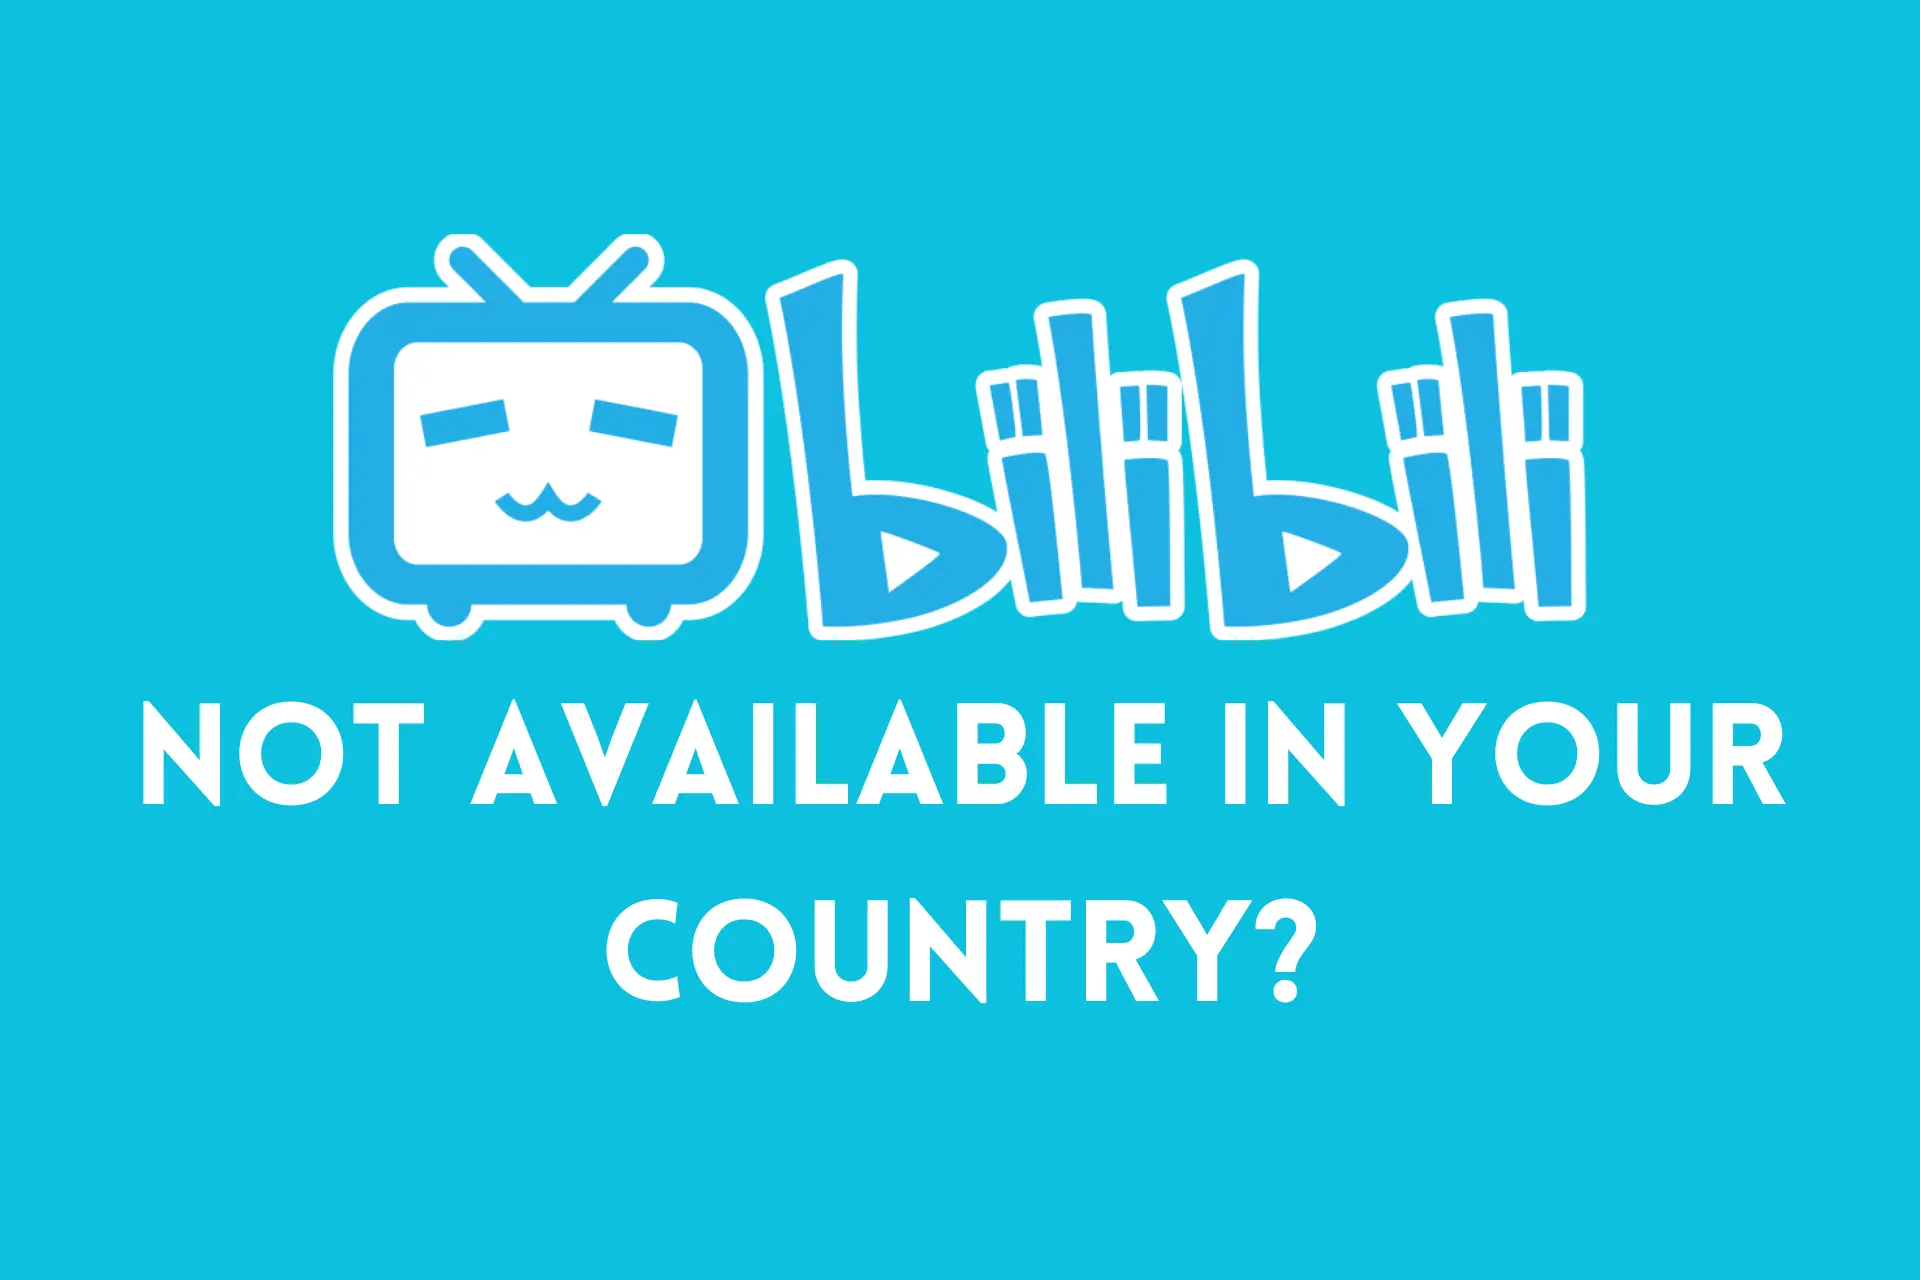 bilibili app not available in your country